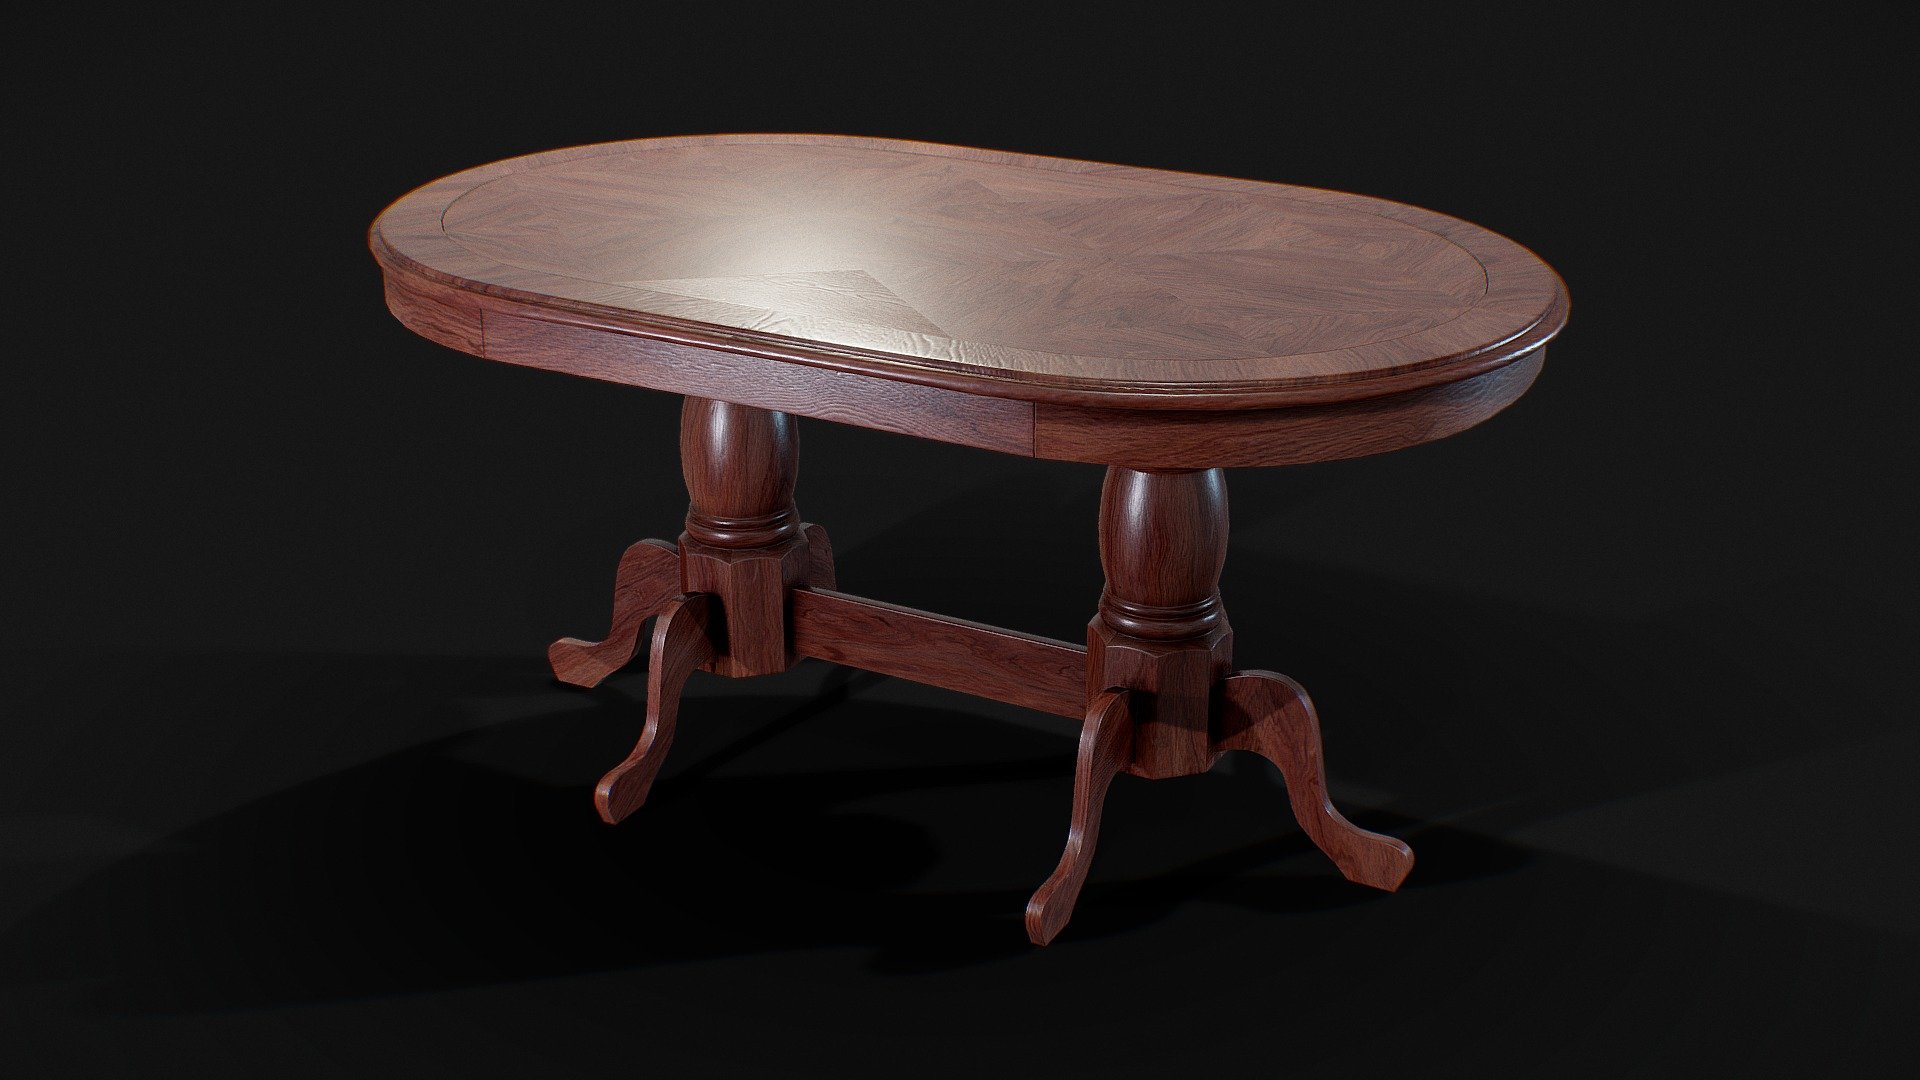 It is a 3d models of dining table for using in architecture-interiors. It is can be used as a dining furniture in games and many other interior render scenes.

This model is created in 3ds Max and textured in Substance Painter.

This model is made in real proportions.

High quality of textures are available to download.

Metal-ness workflow- Base Color, Normal, Metal-ness, Ambient Occlusion and Roughness Textures - Woodway Dining Table - Buy Royalty Free 3D model by 3dJNCTN (@surajrai18.sr) 3d model